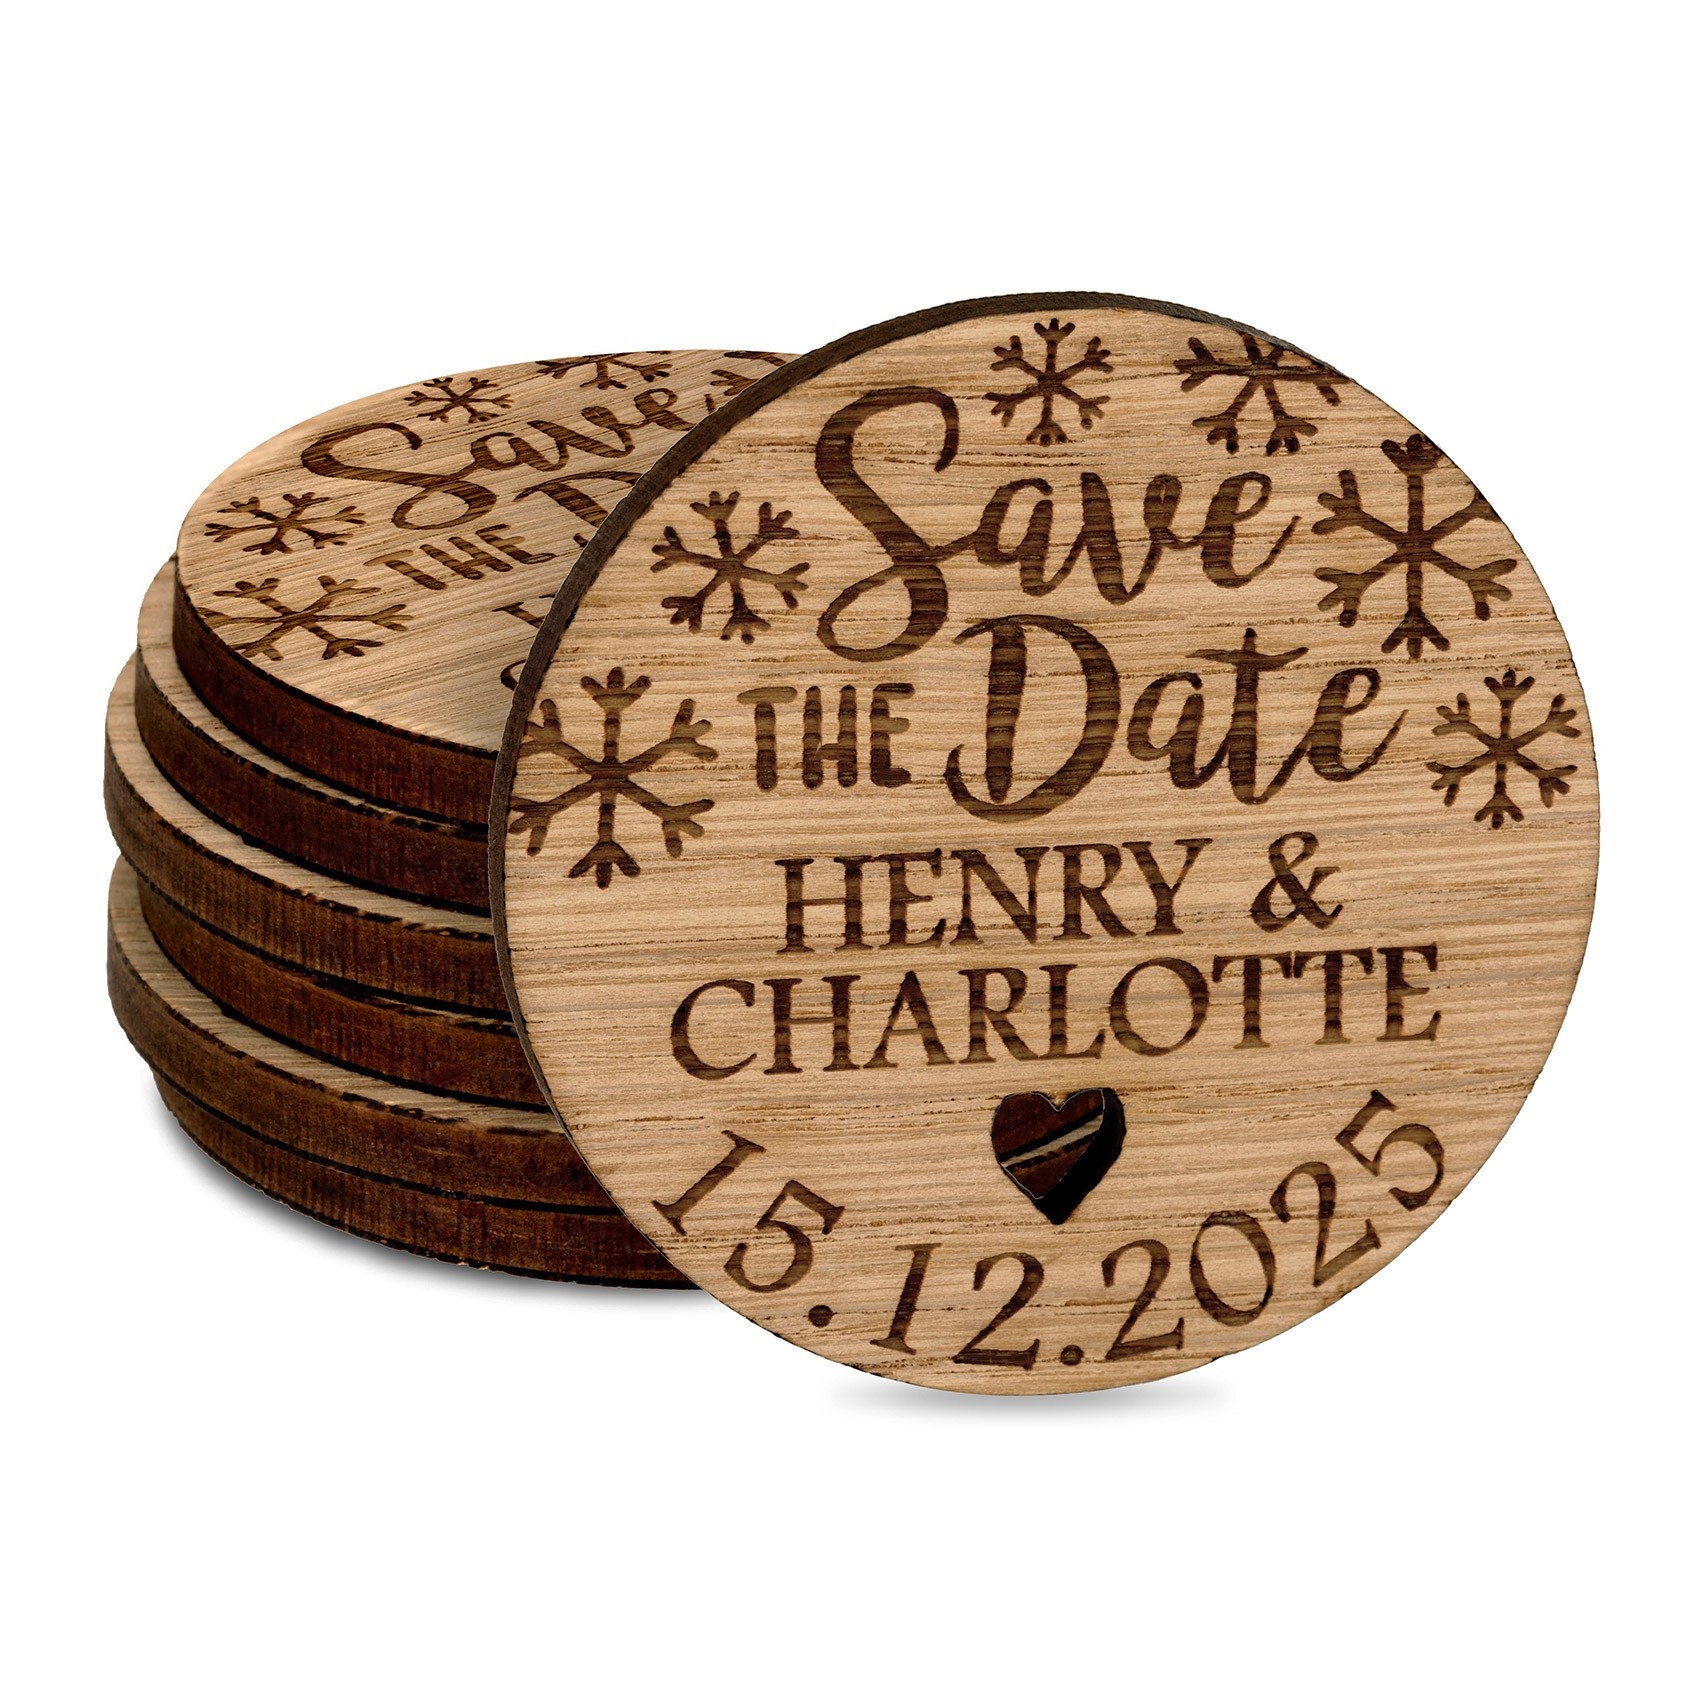 Personalised Wedding Save The Date Invitations Fridge Magnets Cards Snowflakes Winter Christmas Wooden Favours Charms Rustic Oak Custom